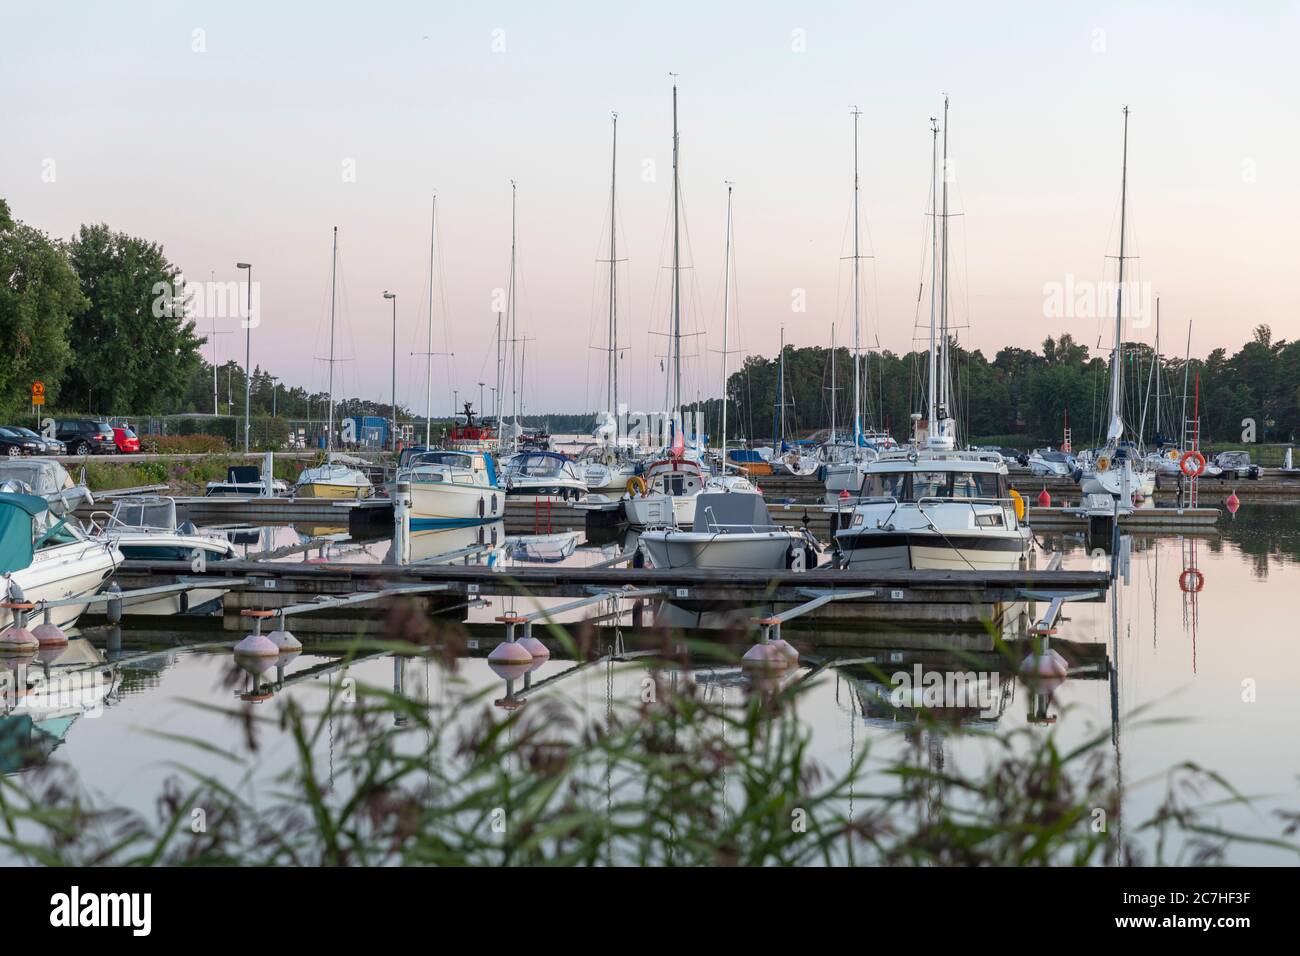 Recreational boats docked in Haukilahti small boat harbor. Local yacht club is organising volunteer security patrols to ensure the safety of boats. Stock Photo